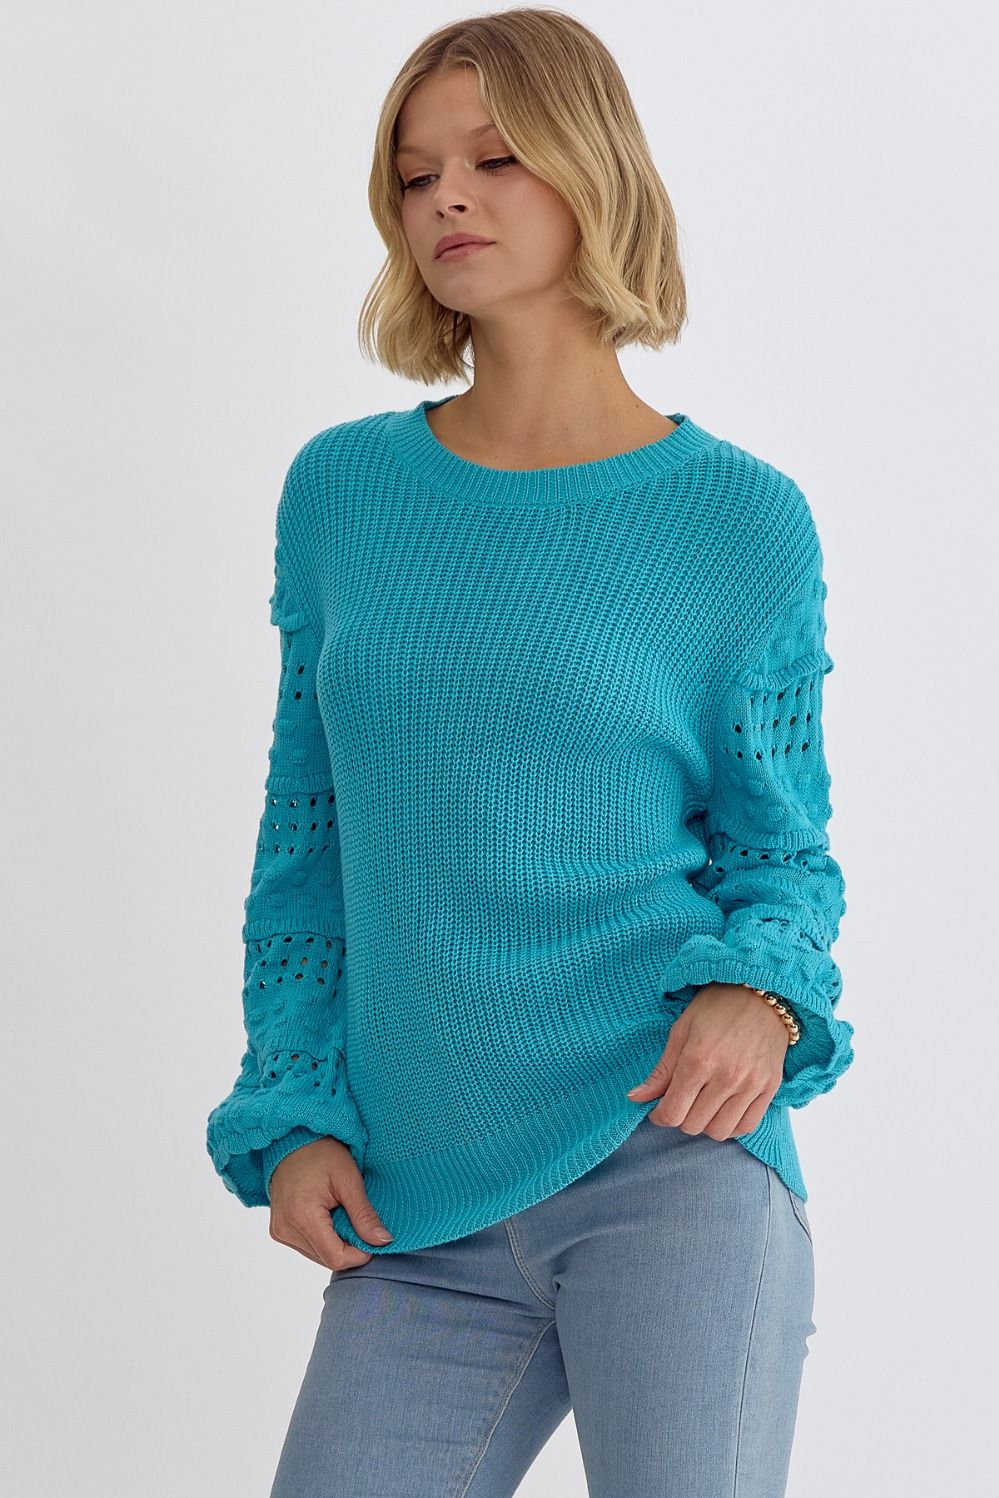 "Dotted On You" Sweater (Aqua) - Happily Ever Aften